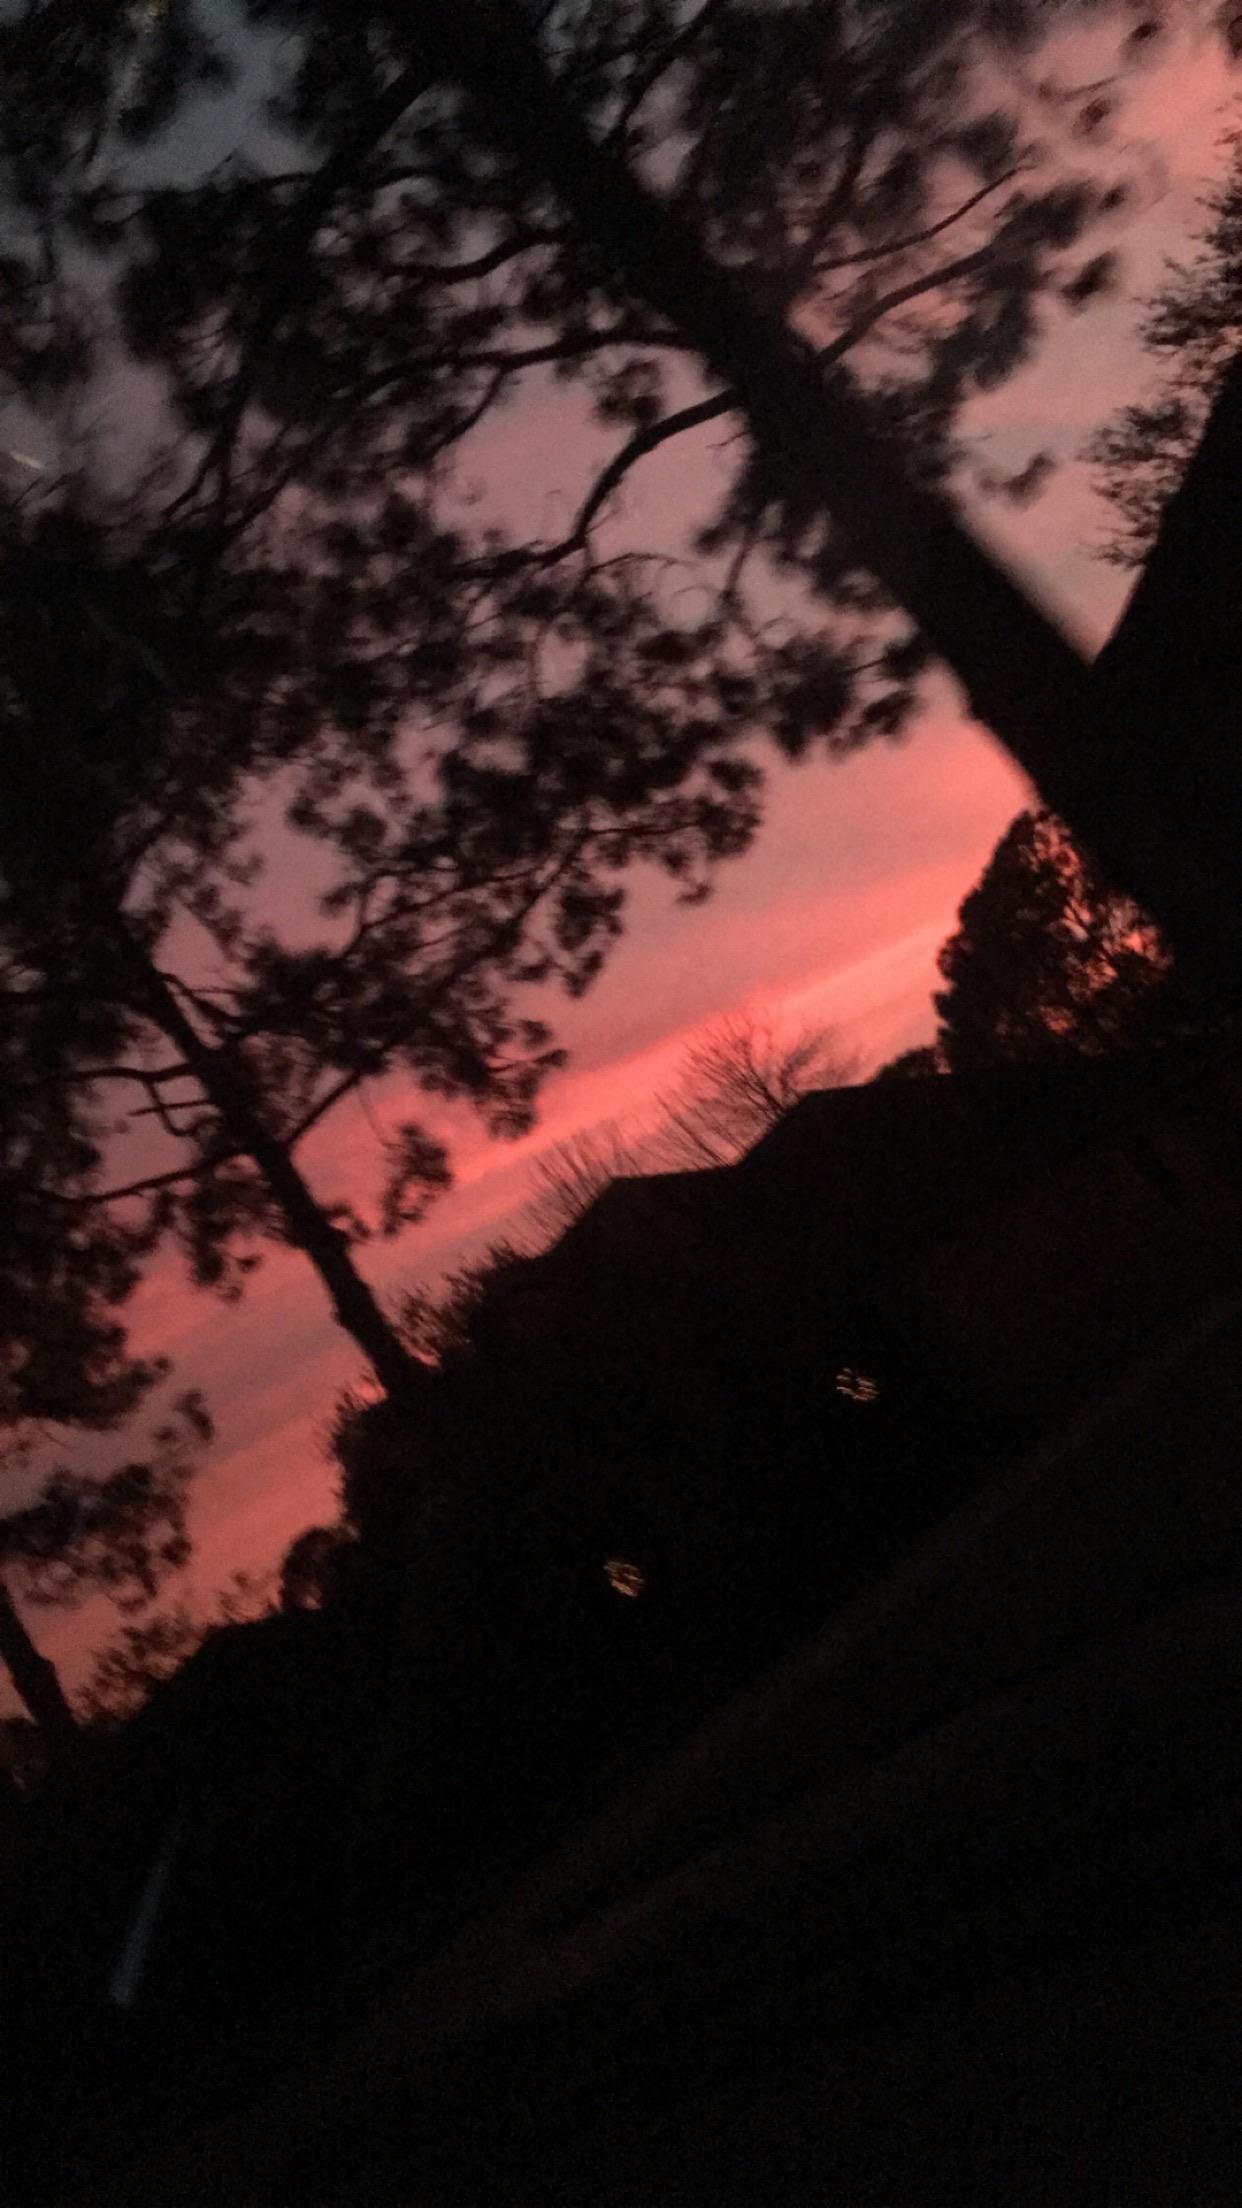 A sunset is seen through the trees - Blurry